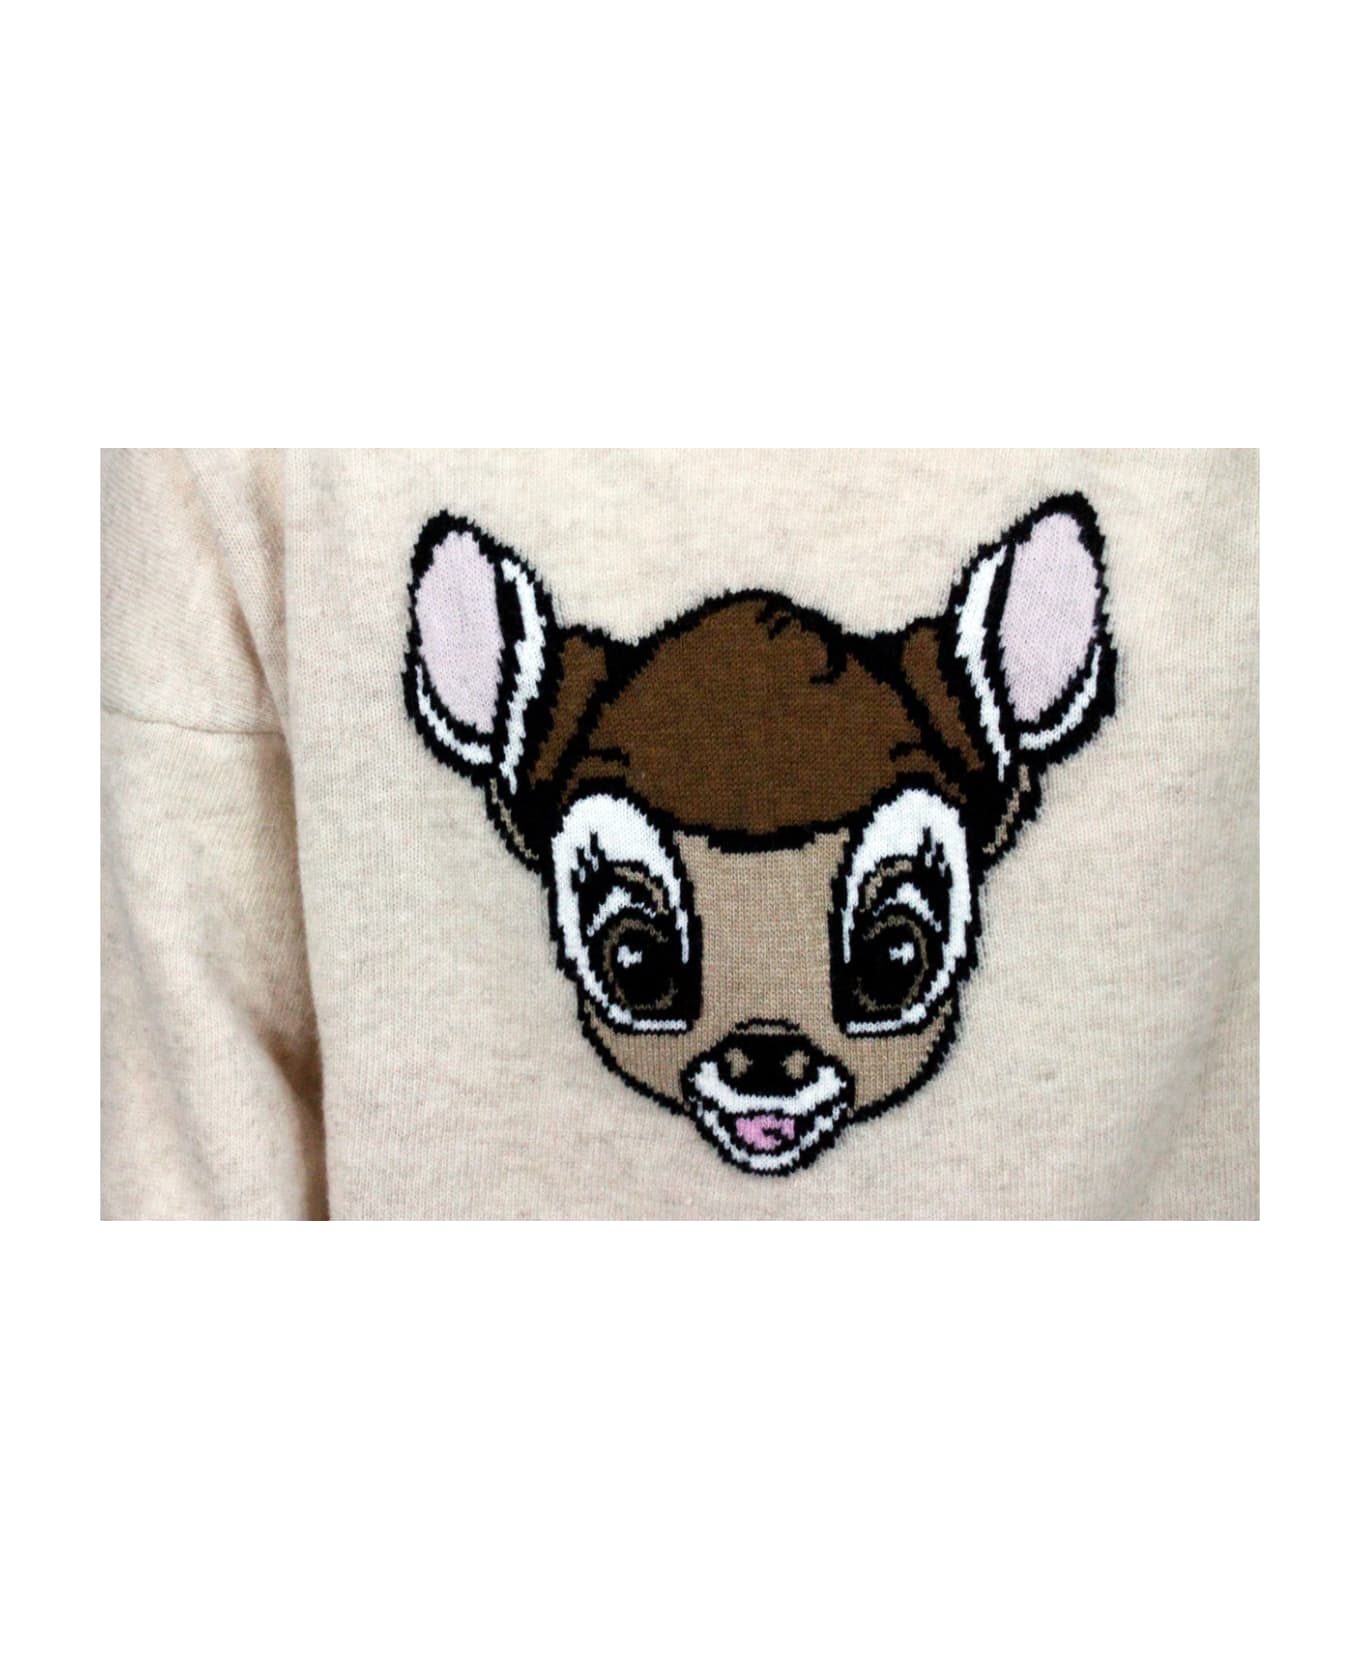 Monnalisa Crewneck Sweater In Wool With Inlay On The Front - Beige